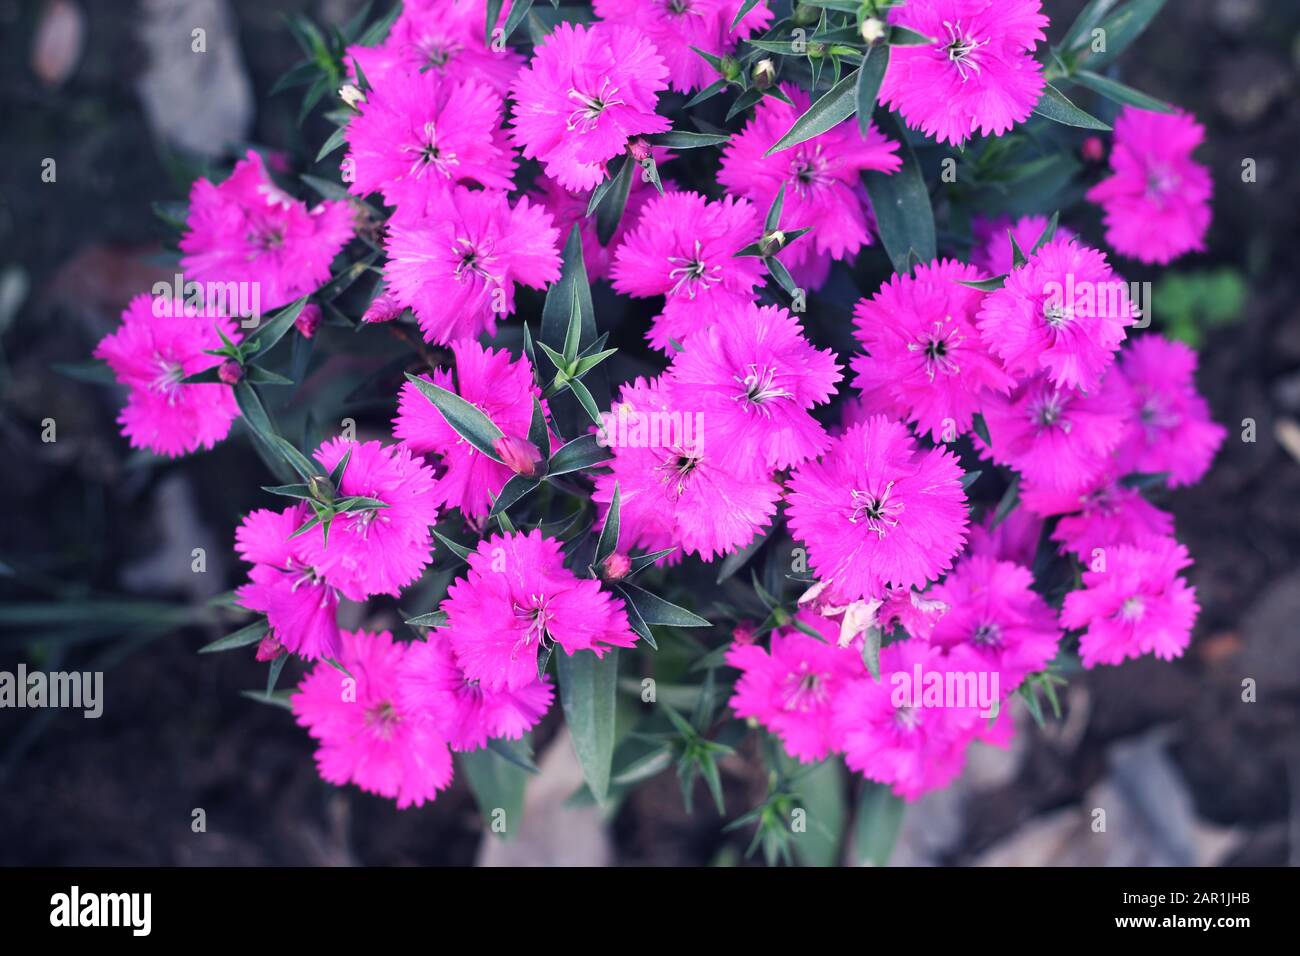 pink and white blooming gillyflower carnation flowers.gillyflower is the carnation or a similar plant of the genus Dianthus.Bright red wild Dianthus b Stock Photo